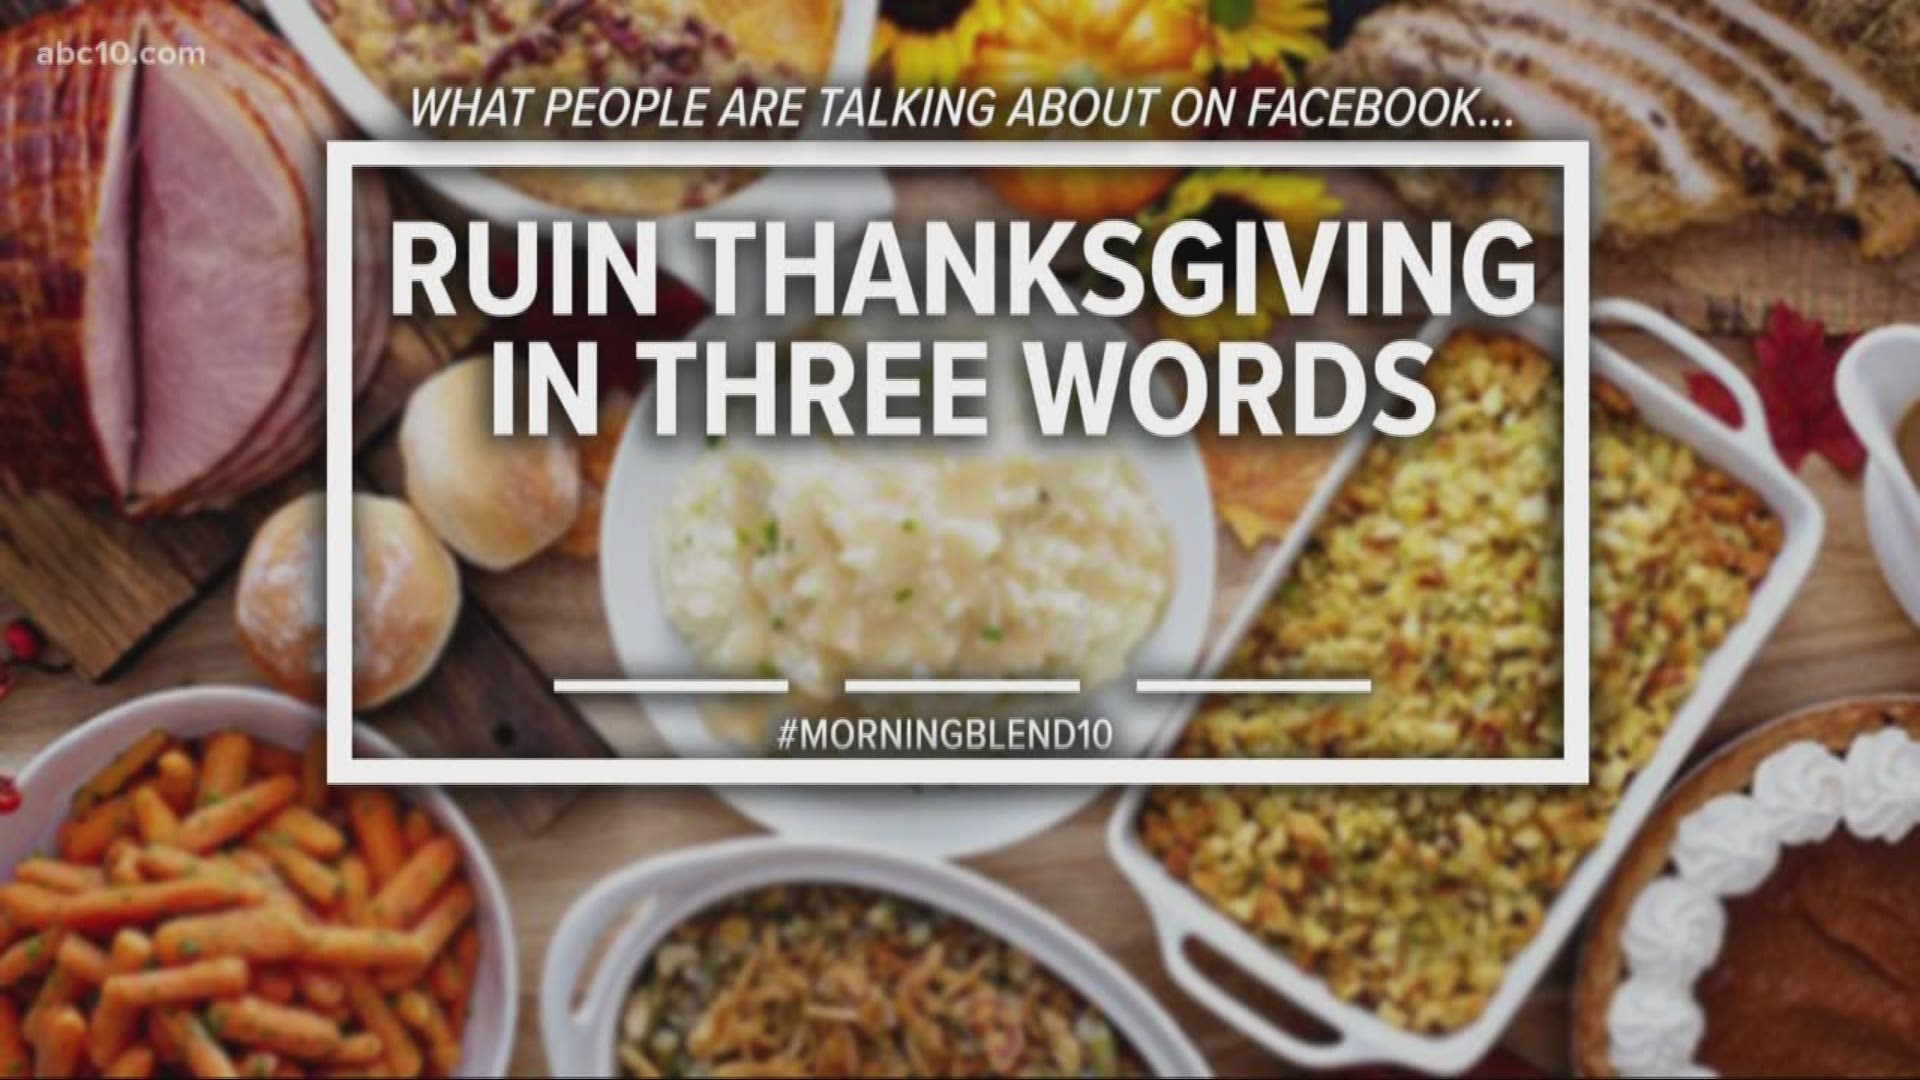 People are weighing in with their comments on how to ruin Thanksgiving in three words.